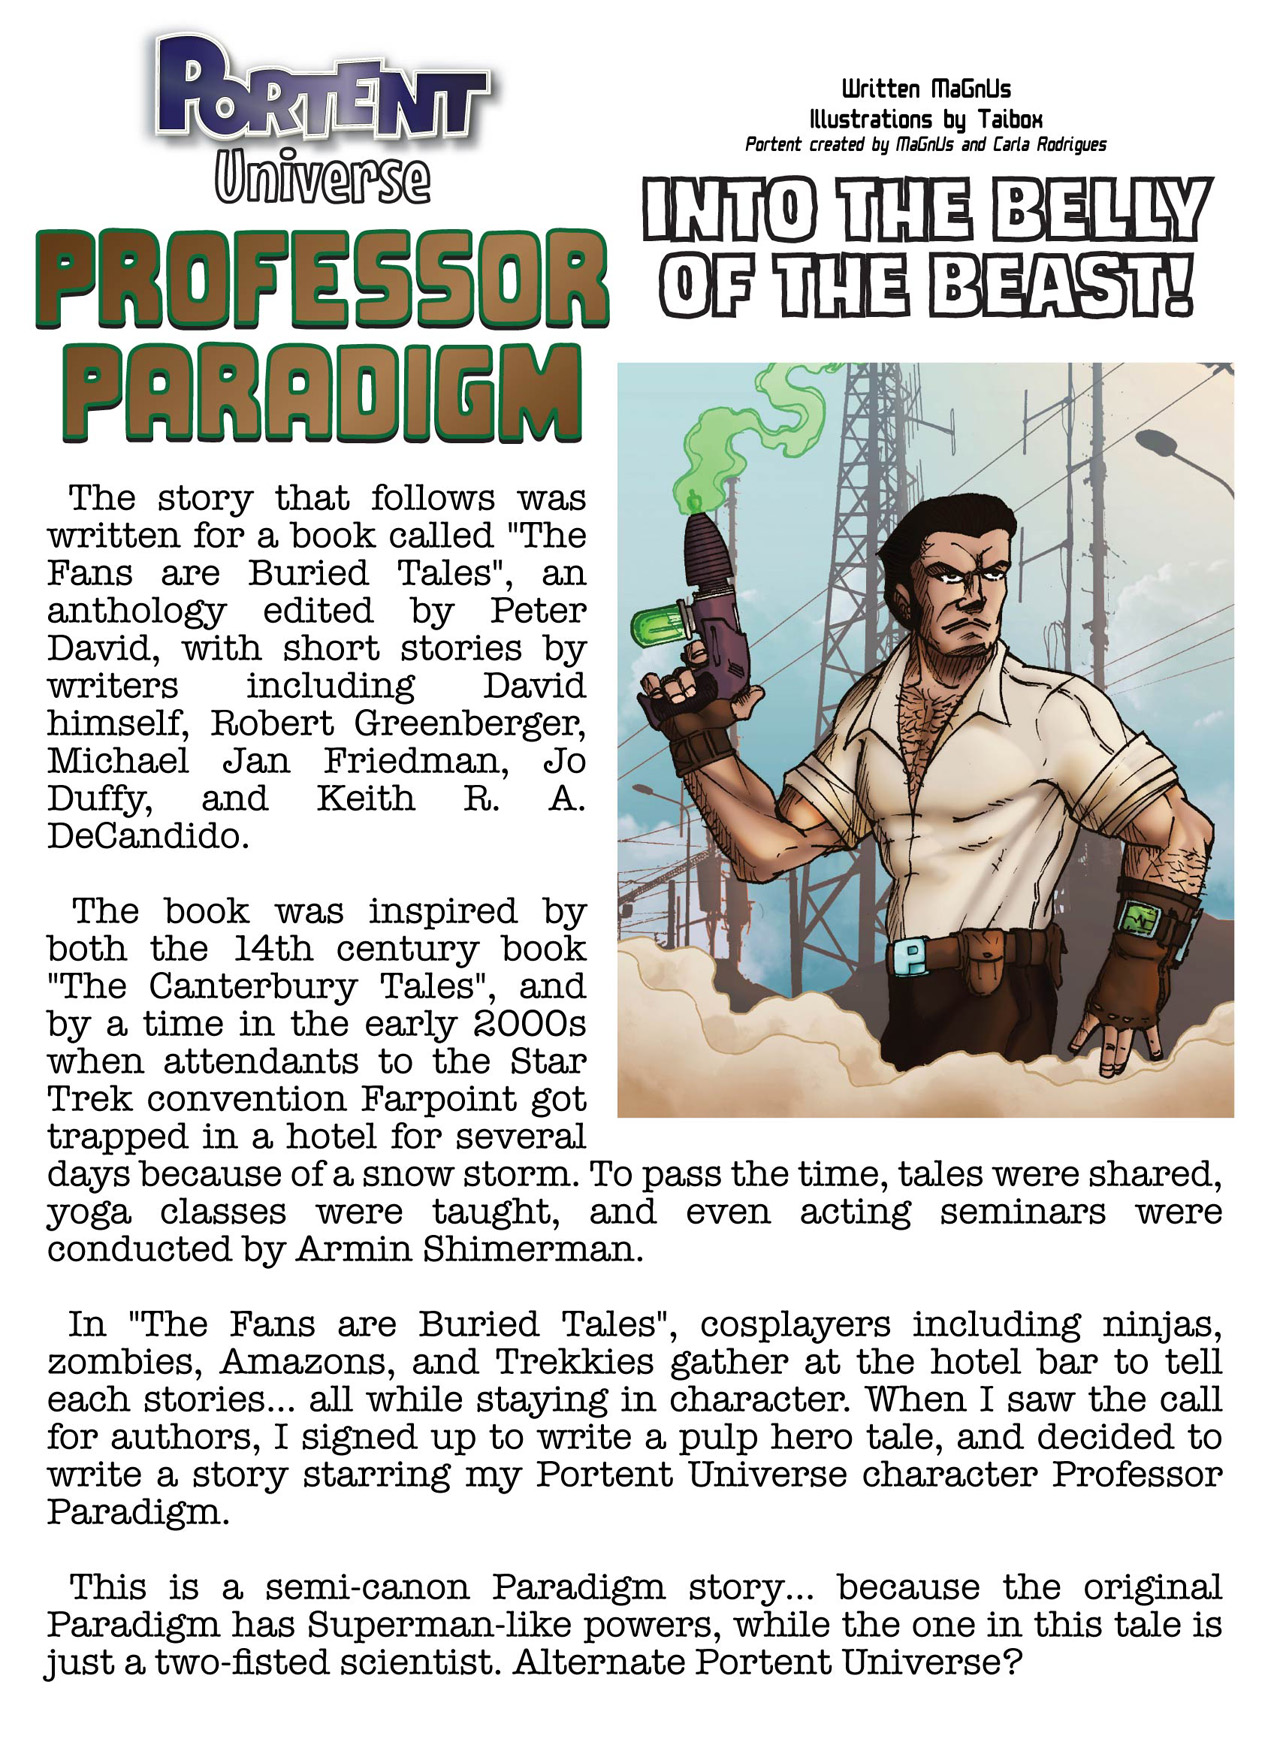 Portent Universe - Into the Belly of the Beast - A Daring Professor Paradigm Adventure!